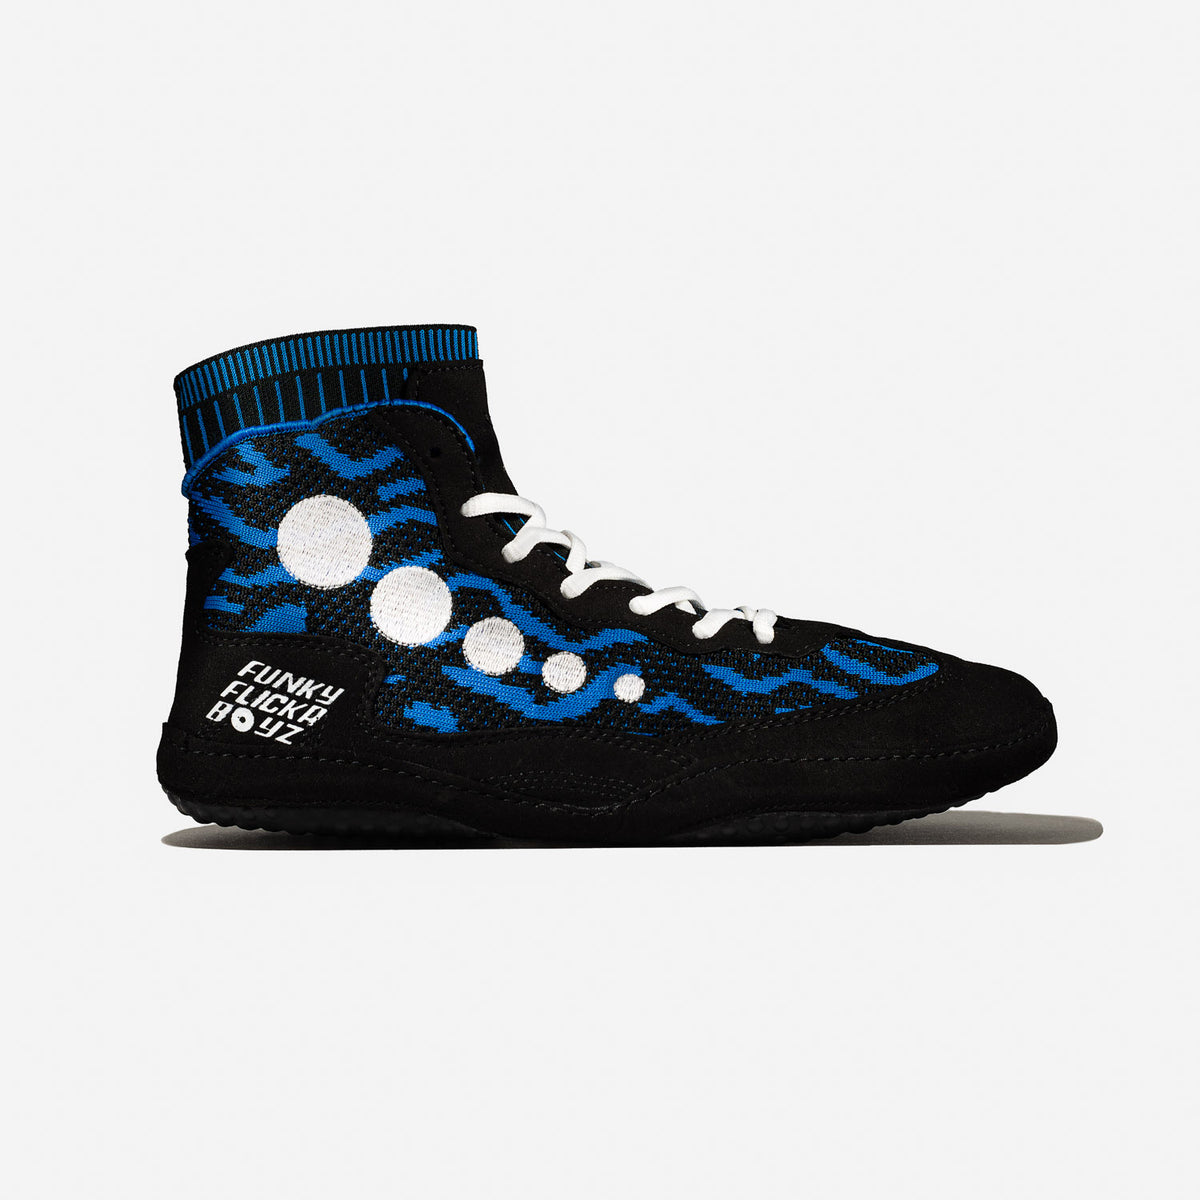 FFB Interlude &quot;Royal&quot; Wrestling Shoes - Funky Flickr Boyz Gear